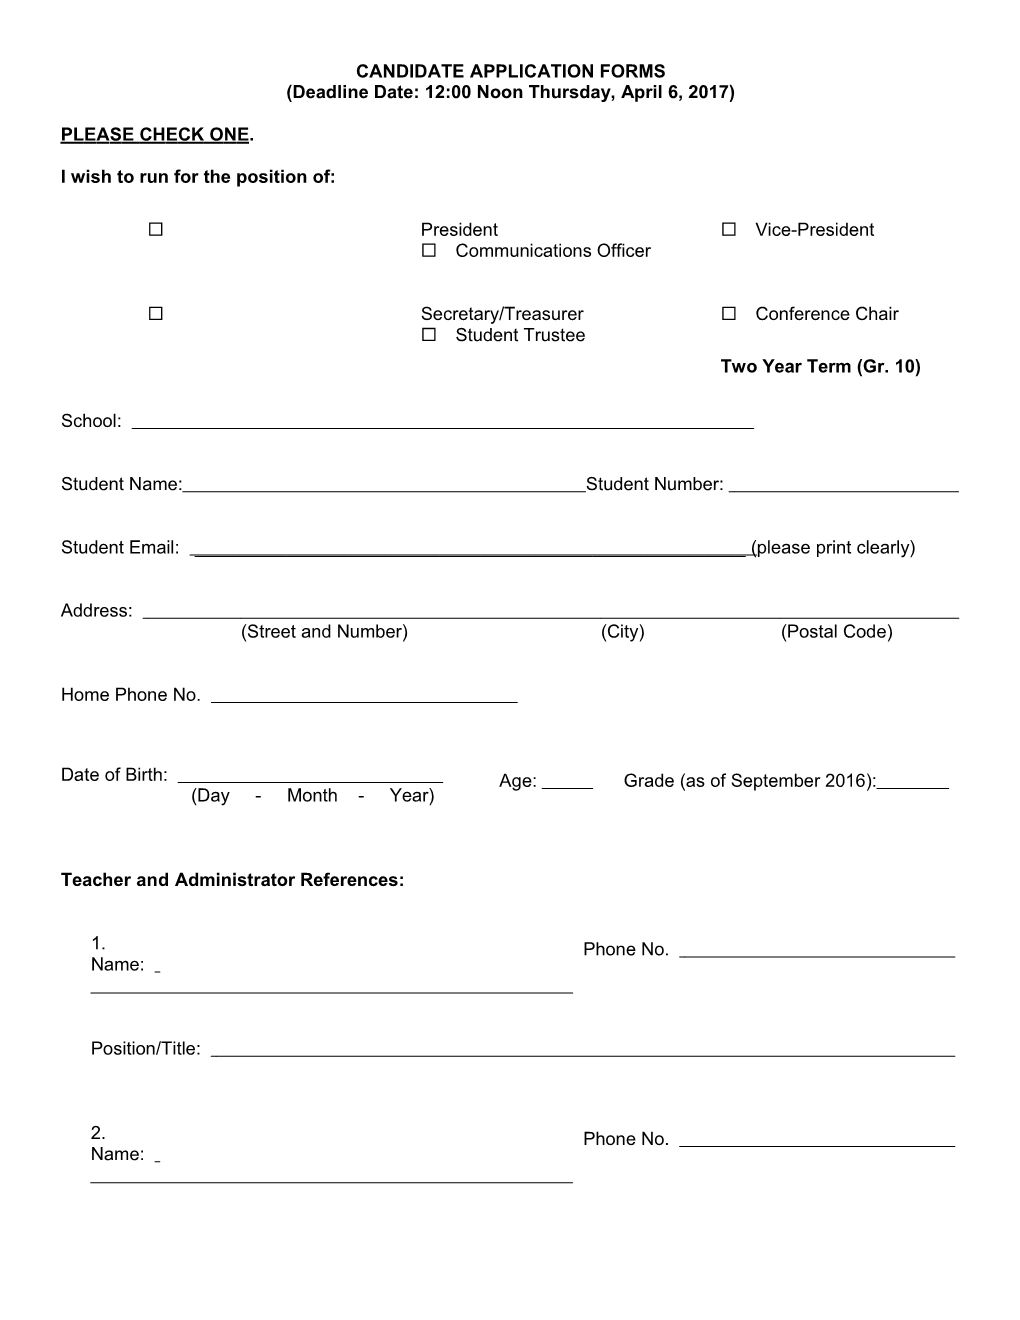 Candidateapplication Forms